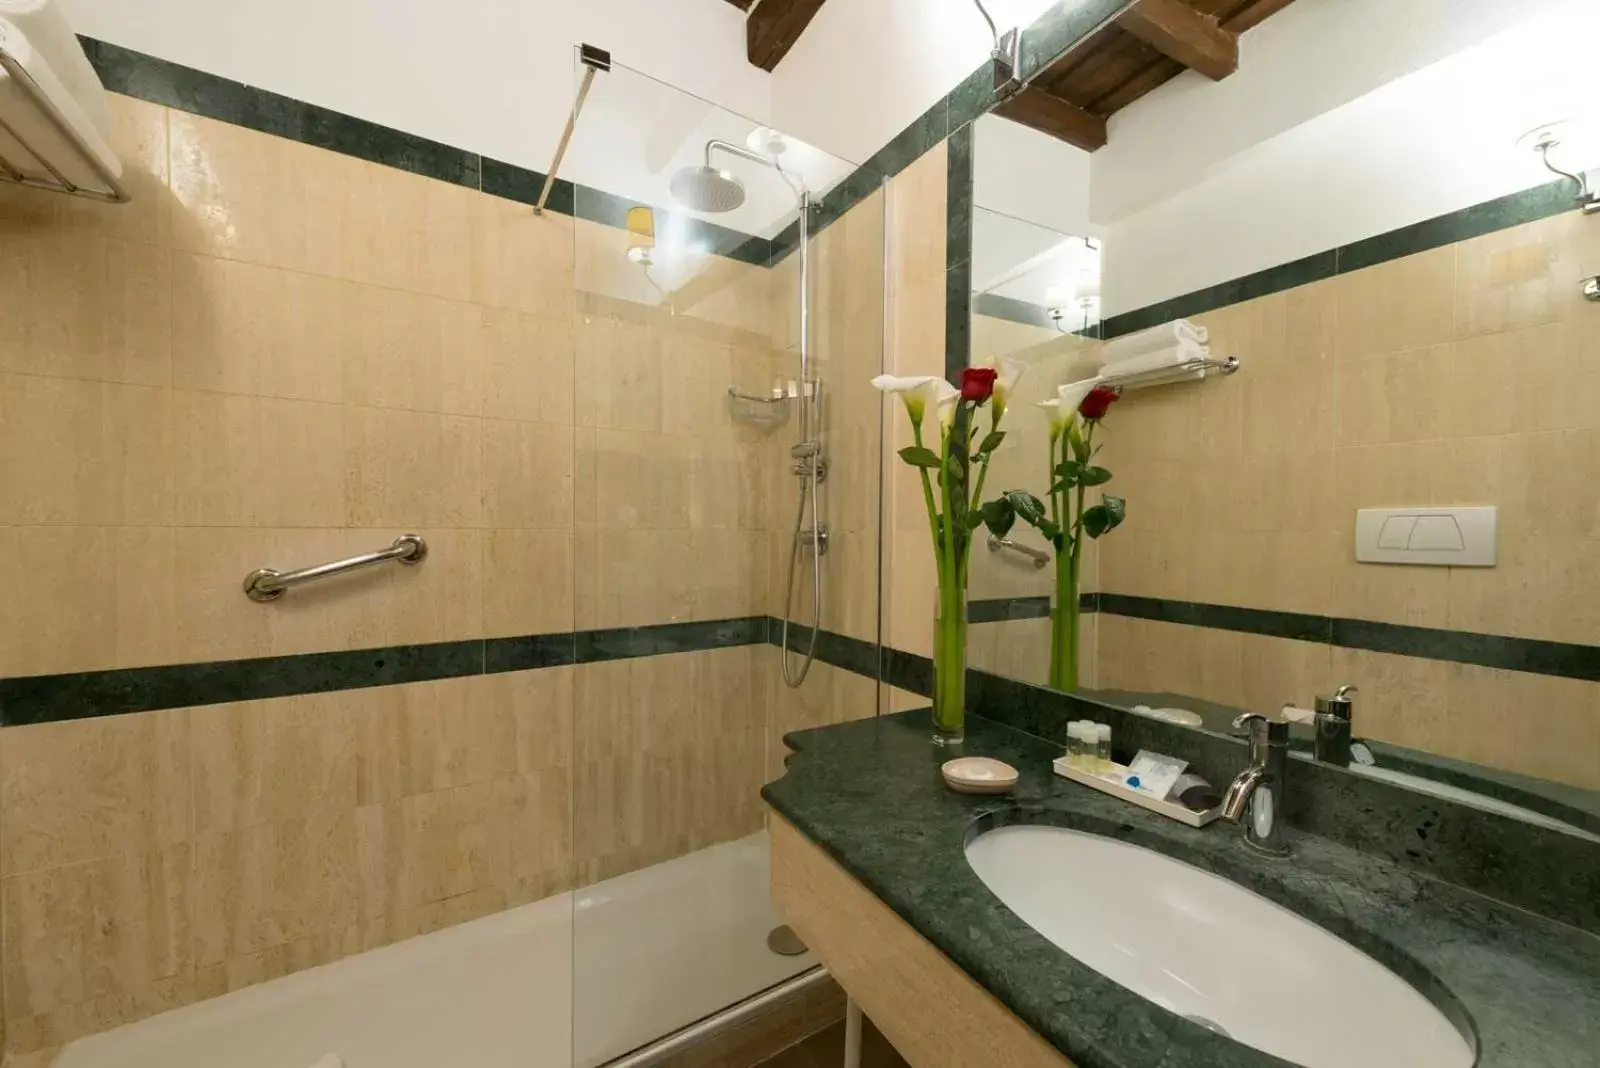 Bathroom in Duca d'Alba Hotel - Chateaux & Hotels Collection